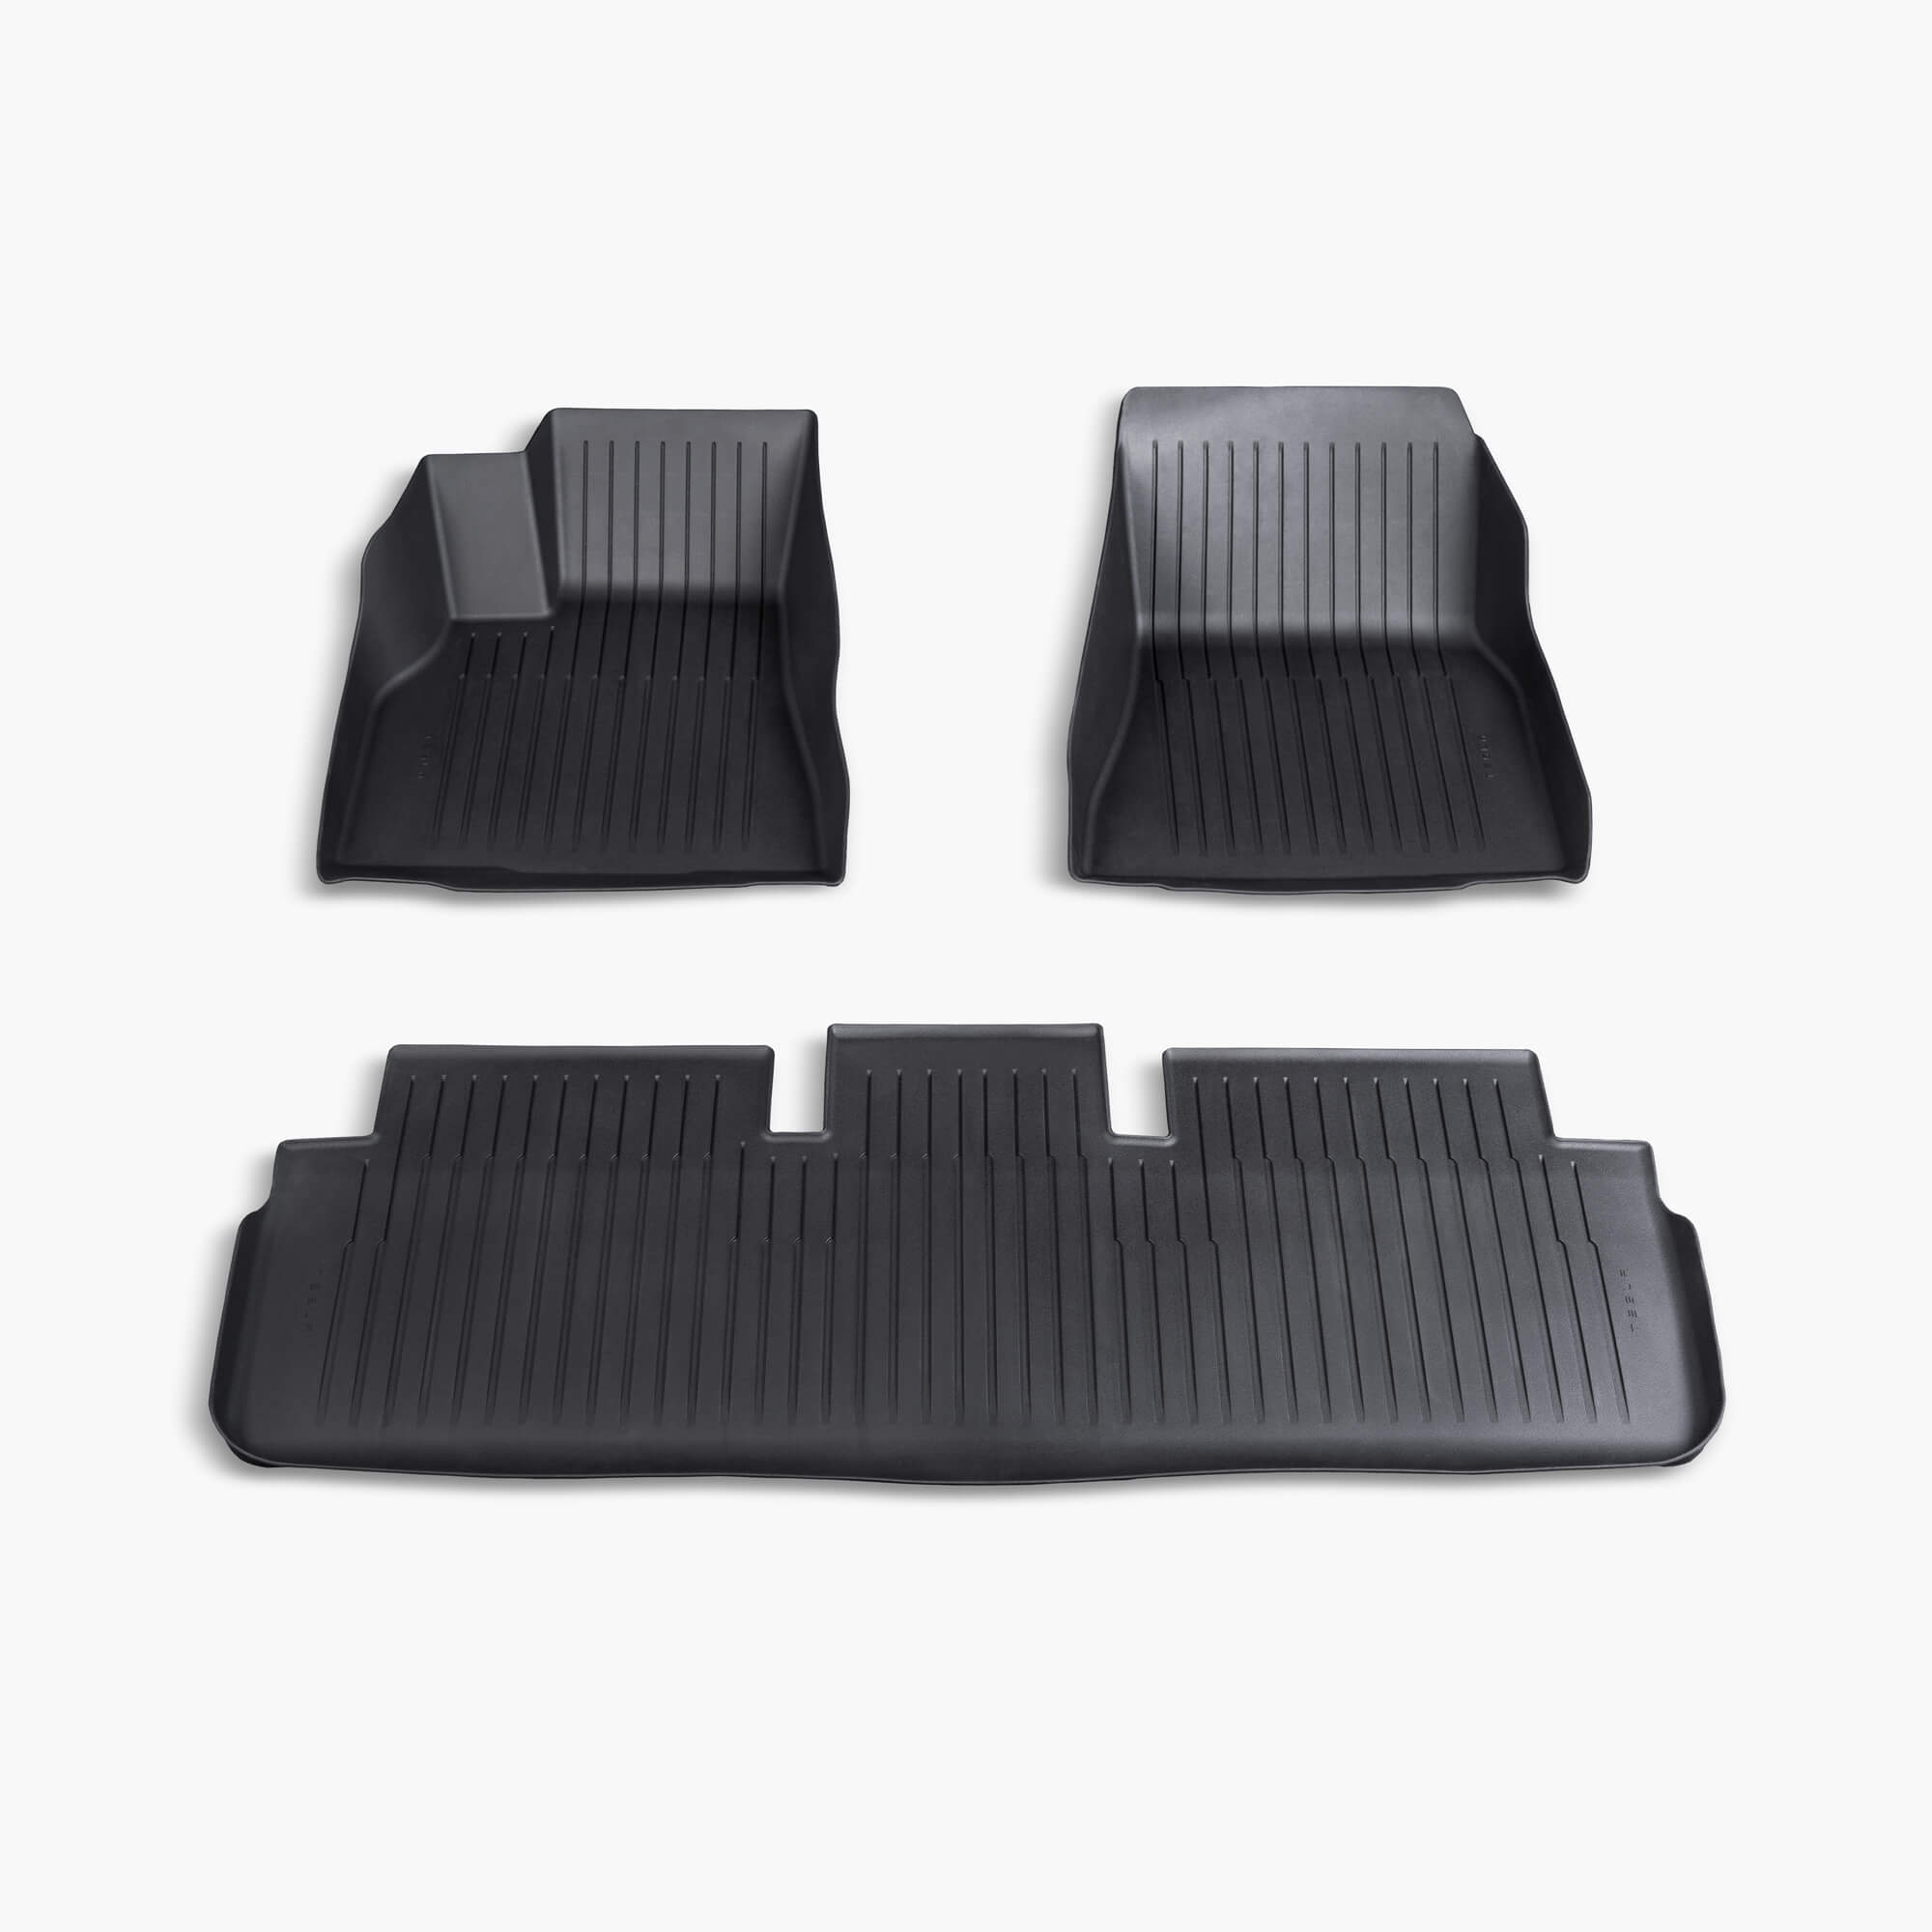 Model S All-Weather Interior Liners